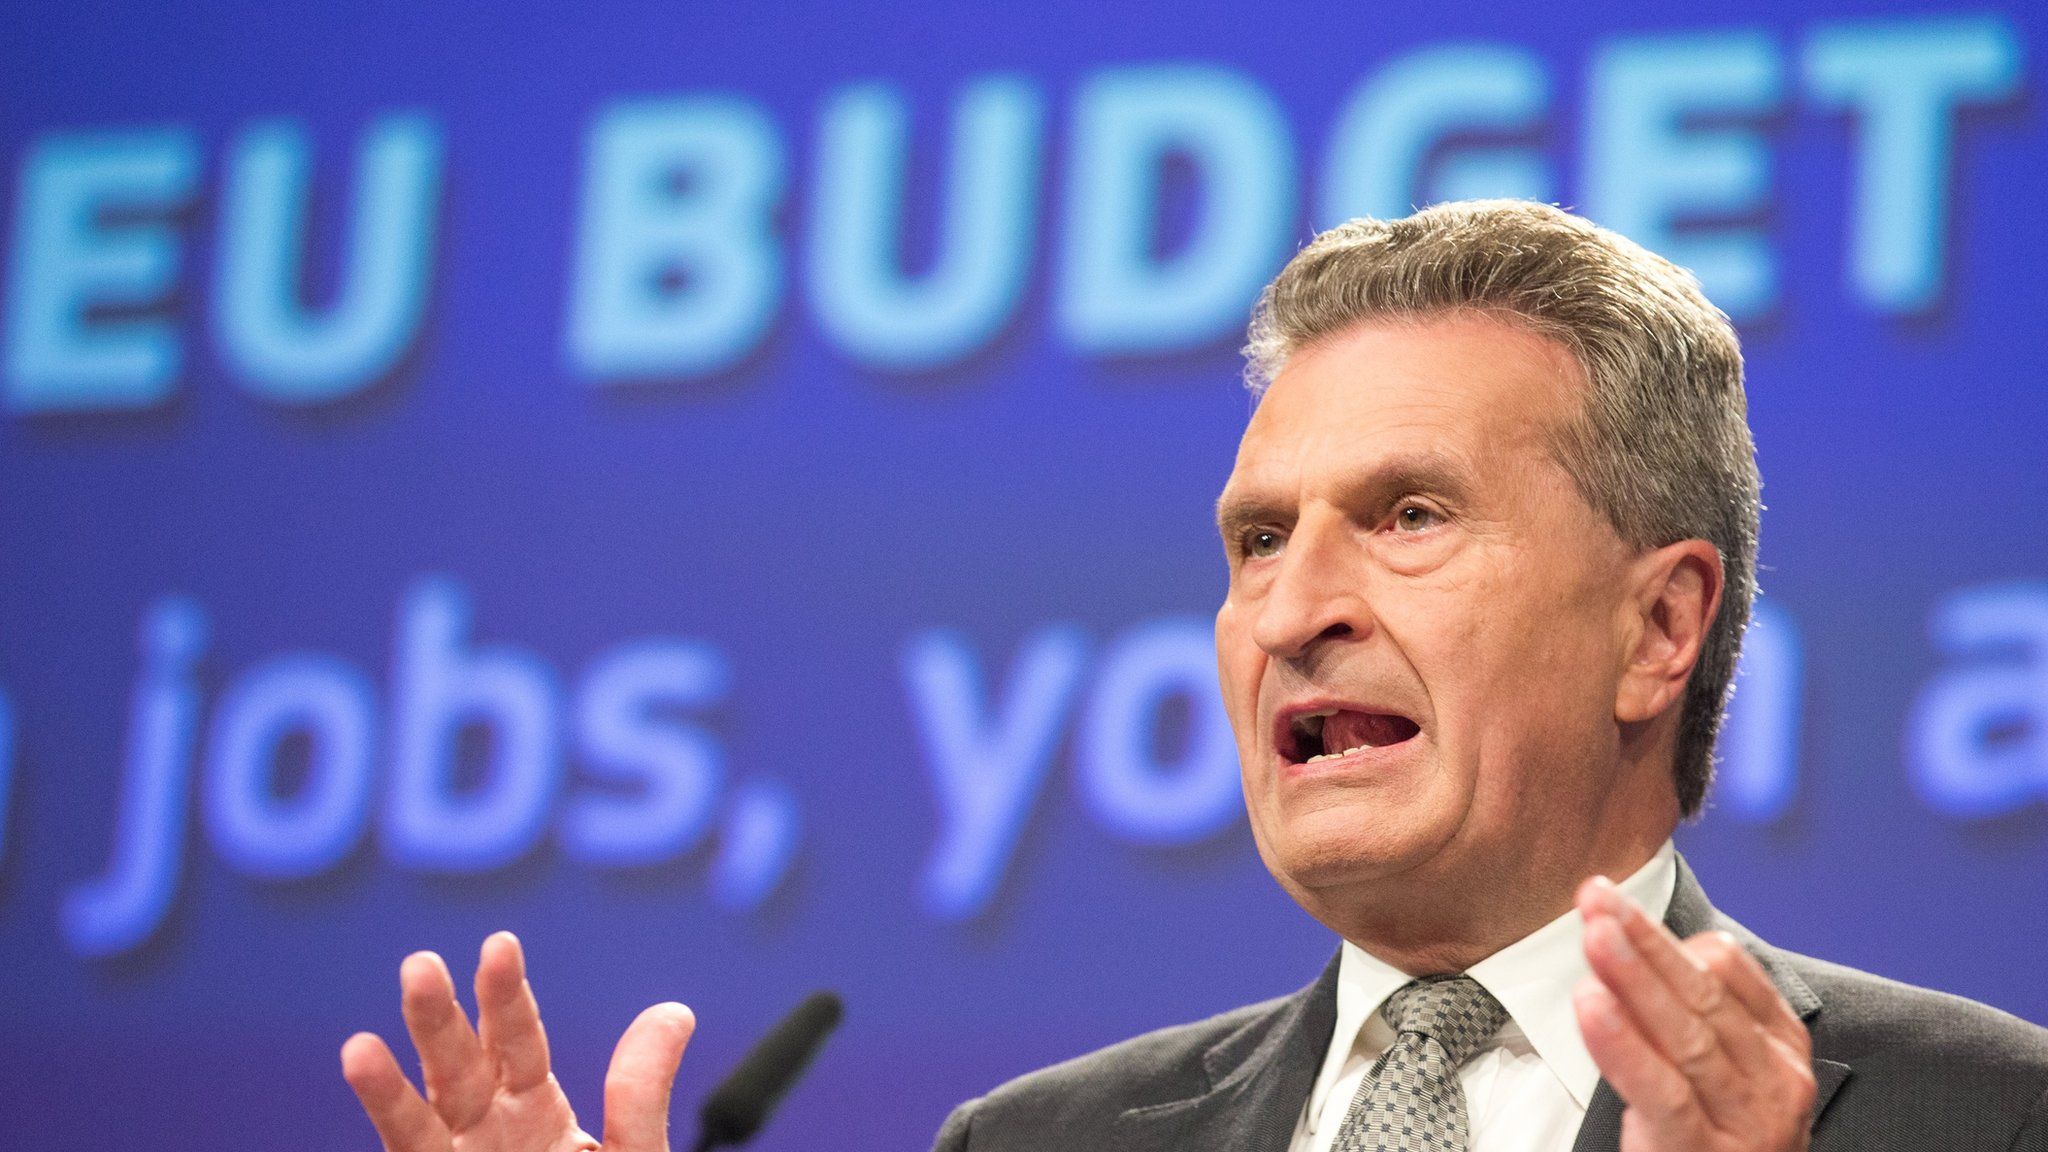 EU budget commissioner Guenther Oettinger holds a press conference at the EU Commission in Brussels, Belgium, on 30 May 2017